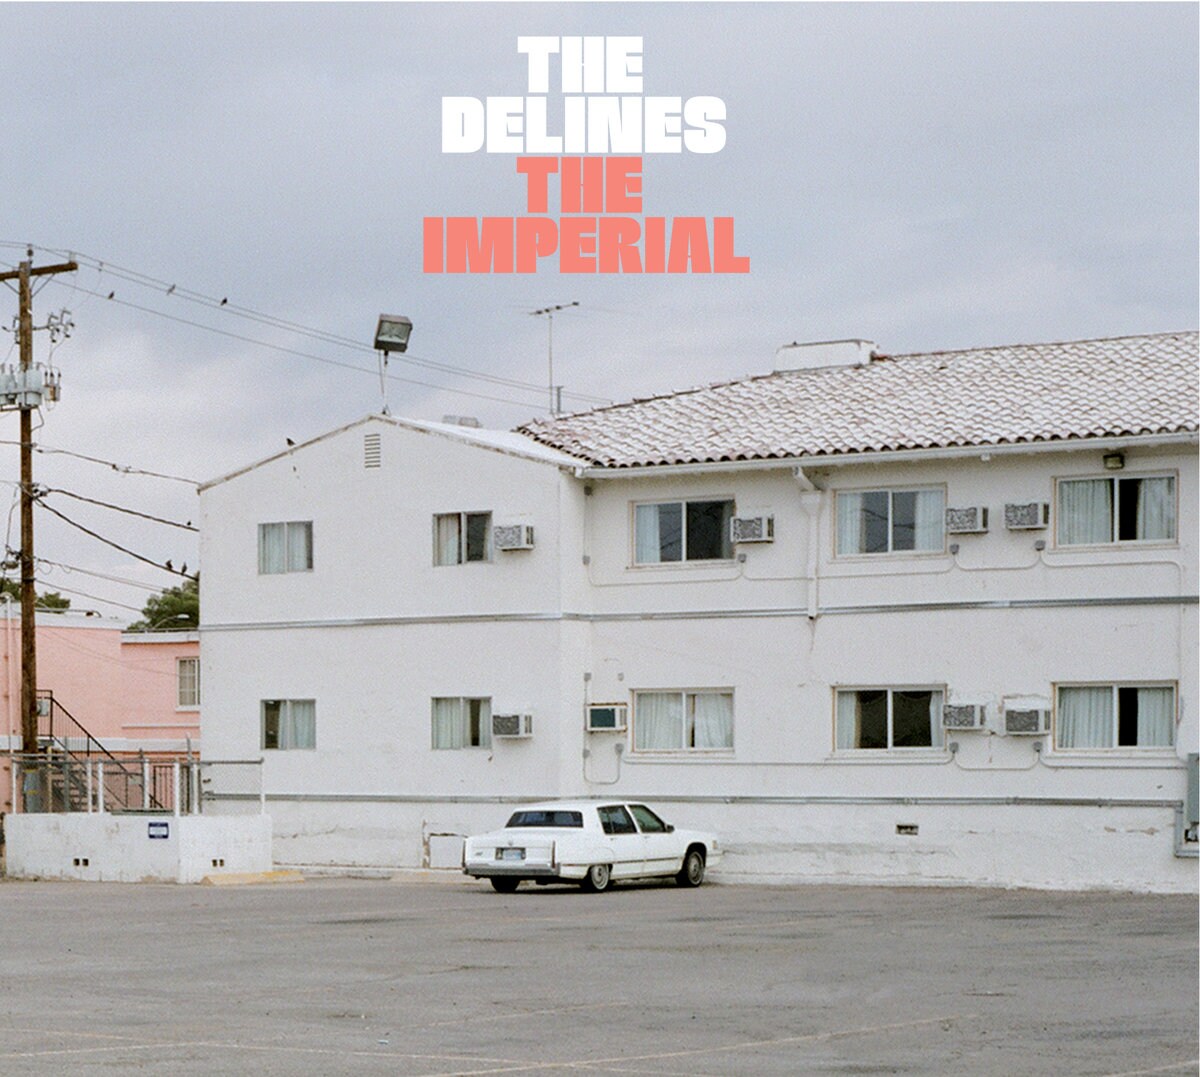 6. The Delines - The Imperial 